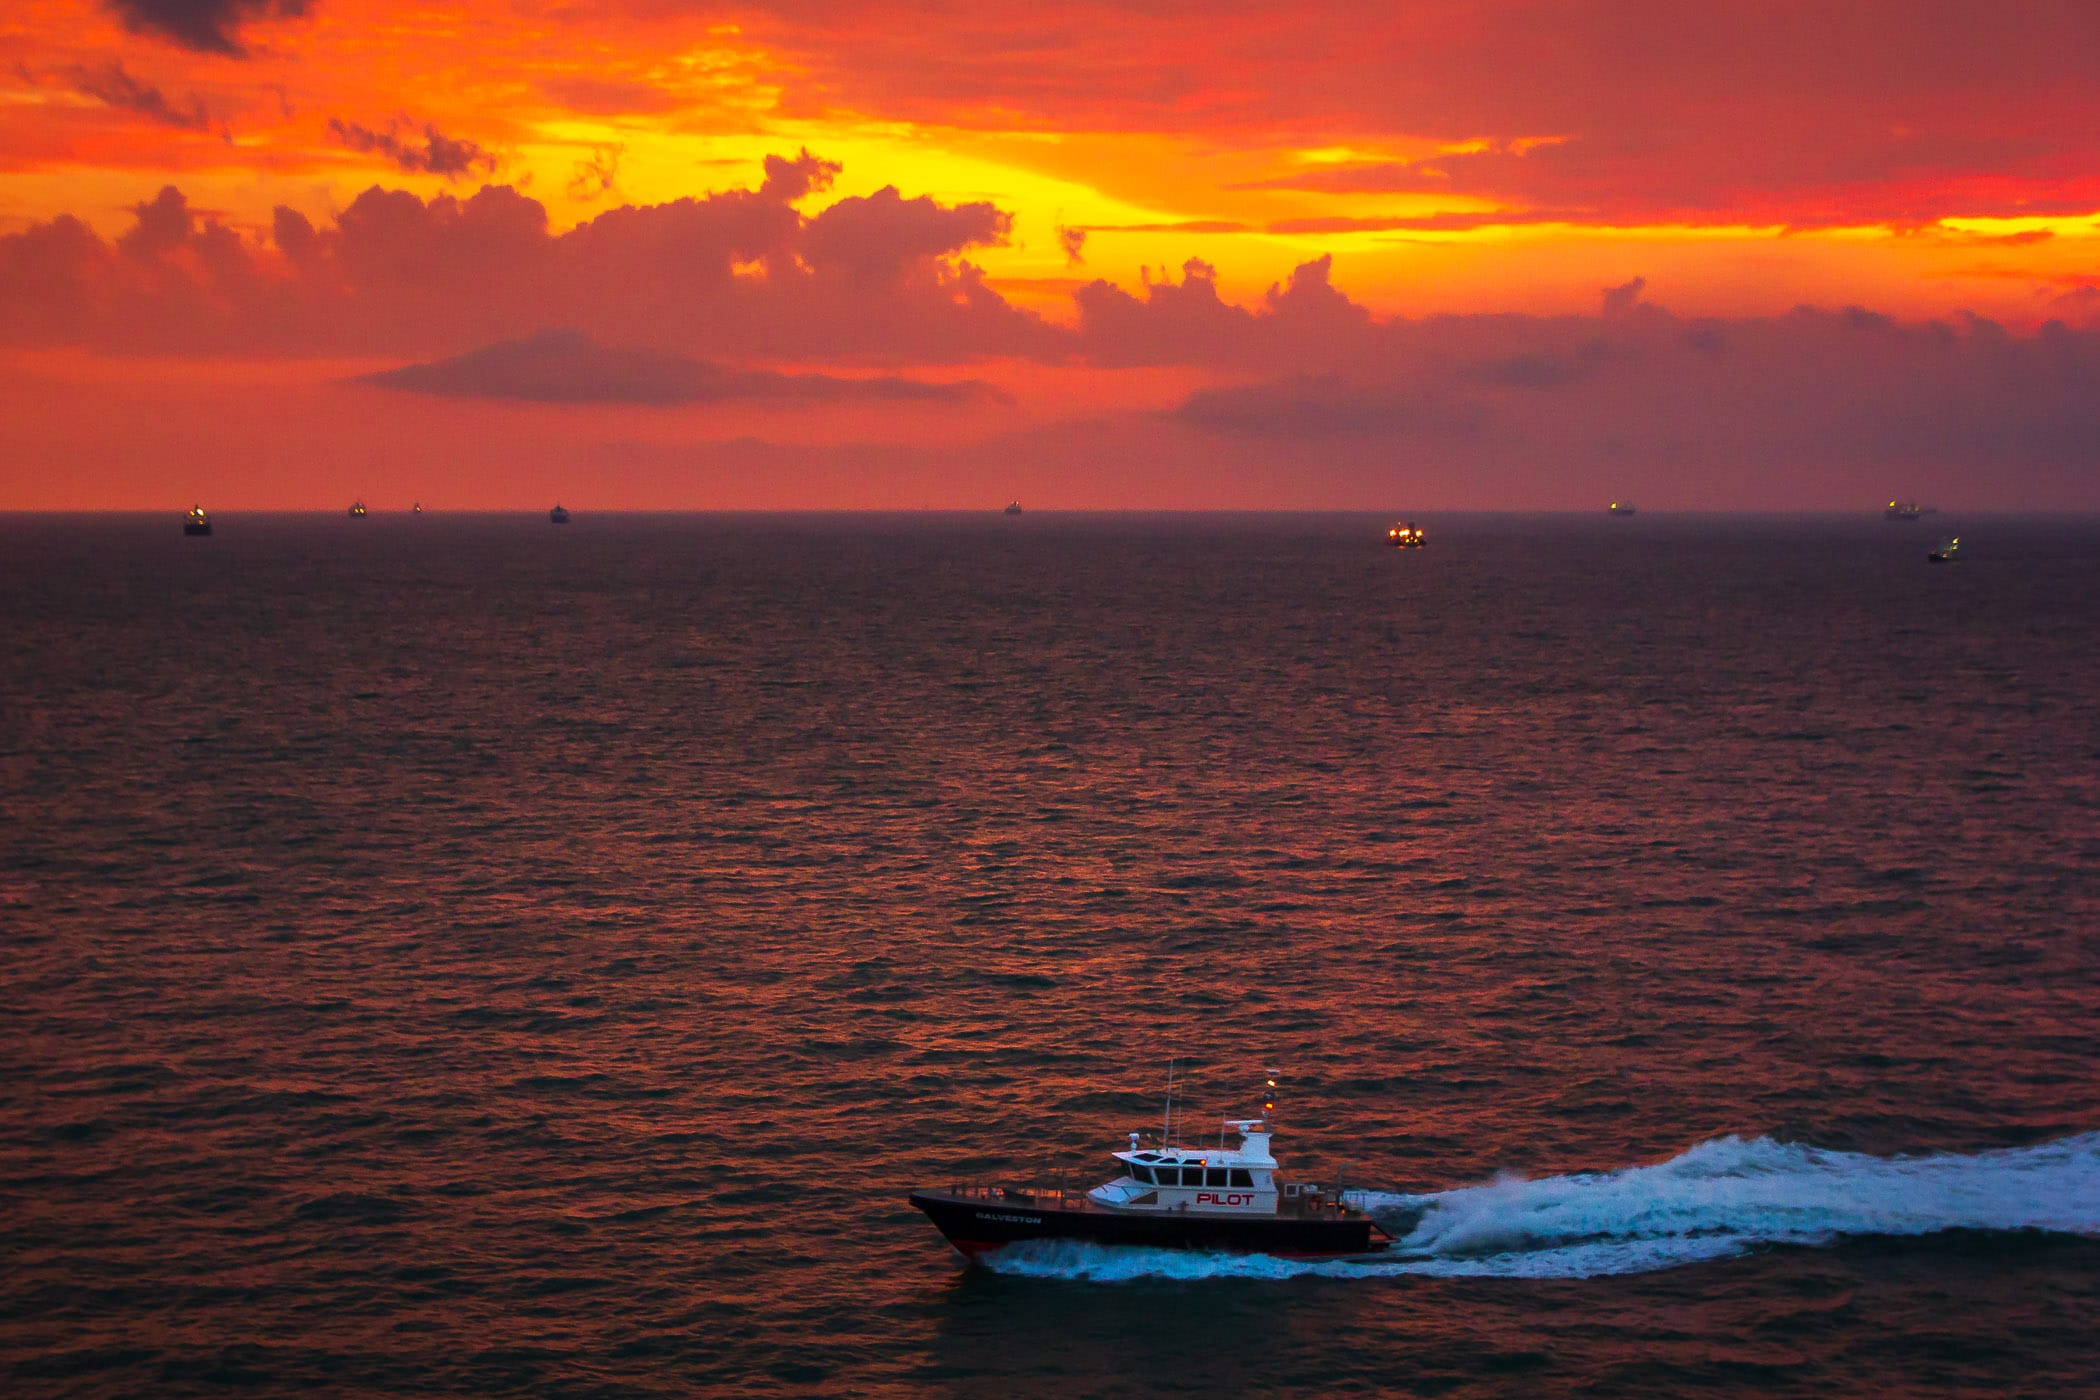 A Port of Galveston, Texas, pilot boat carries a port pilot to a ship as dawn breaks over the Gulf of Mexico.